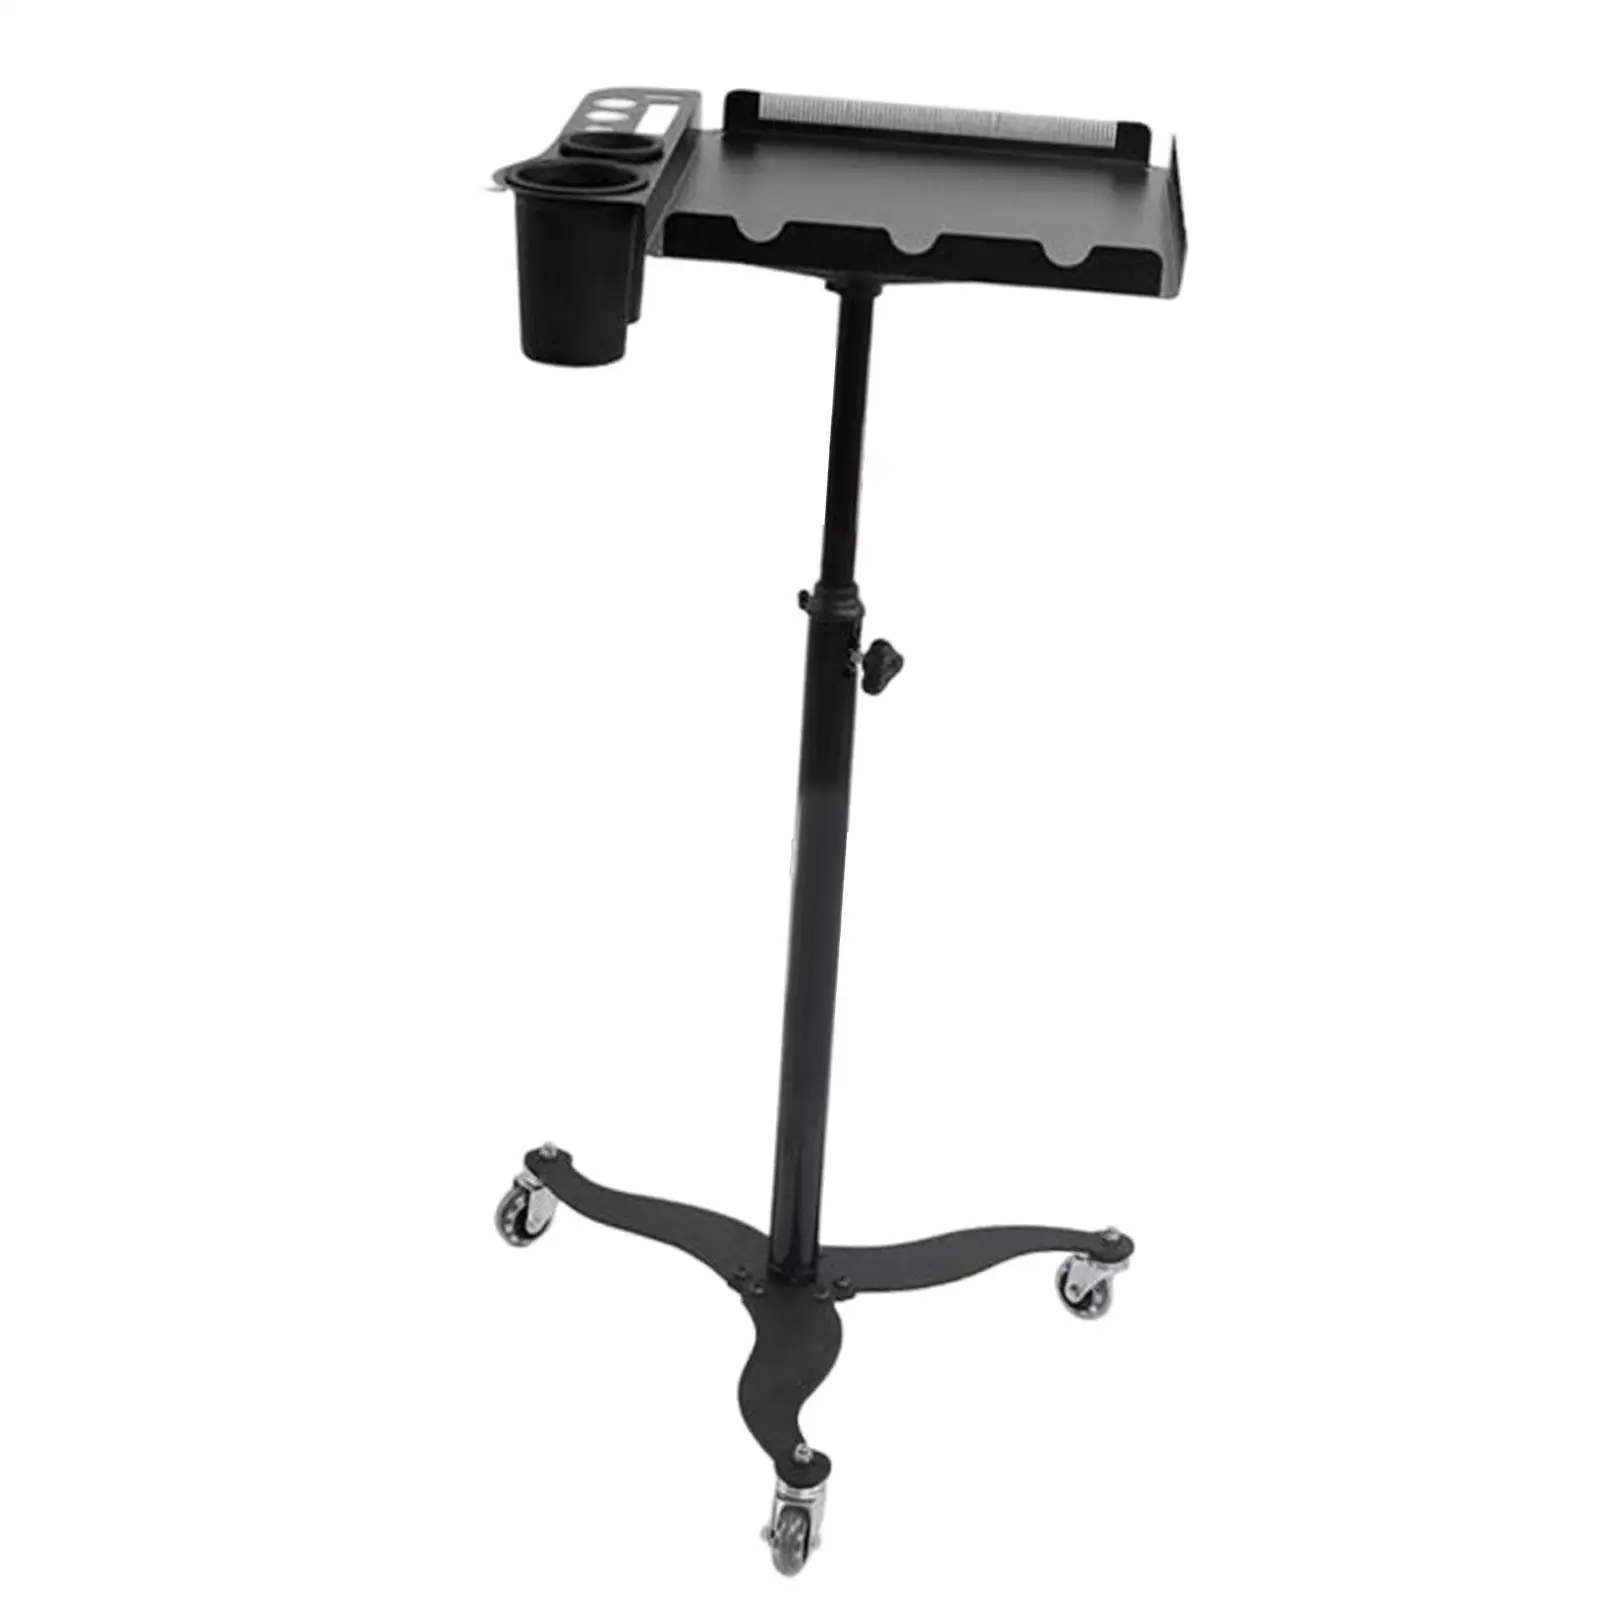 Hair Salon Rolling Cart Tray Instrument Tray Stand Salon Tray On Wheels for Hairdresser